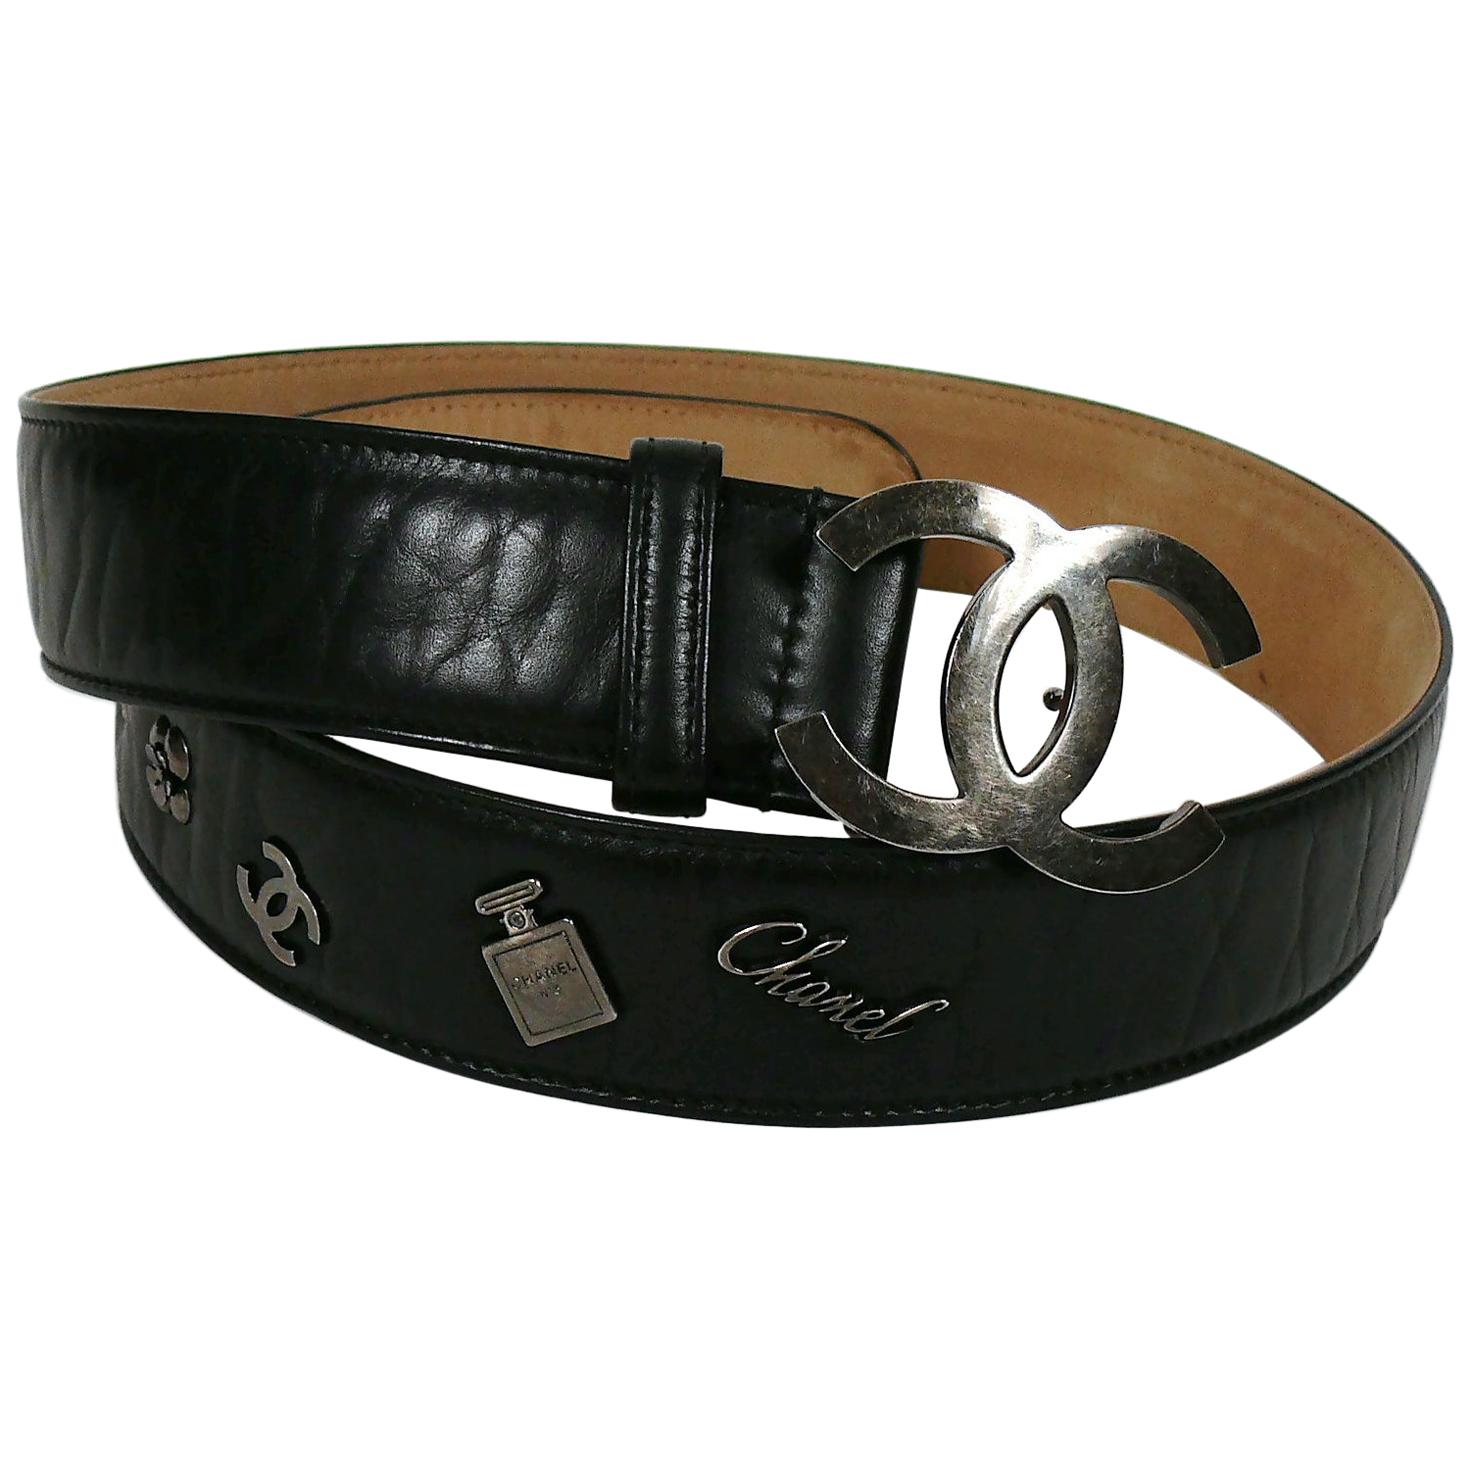 Chanel 2012 Black Leather Belt with CC Buckle and Iconic Details